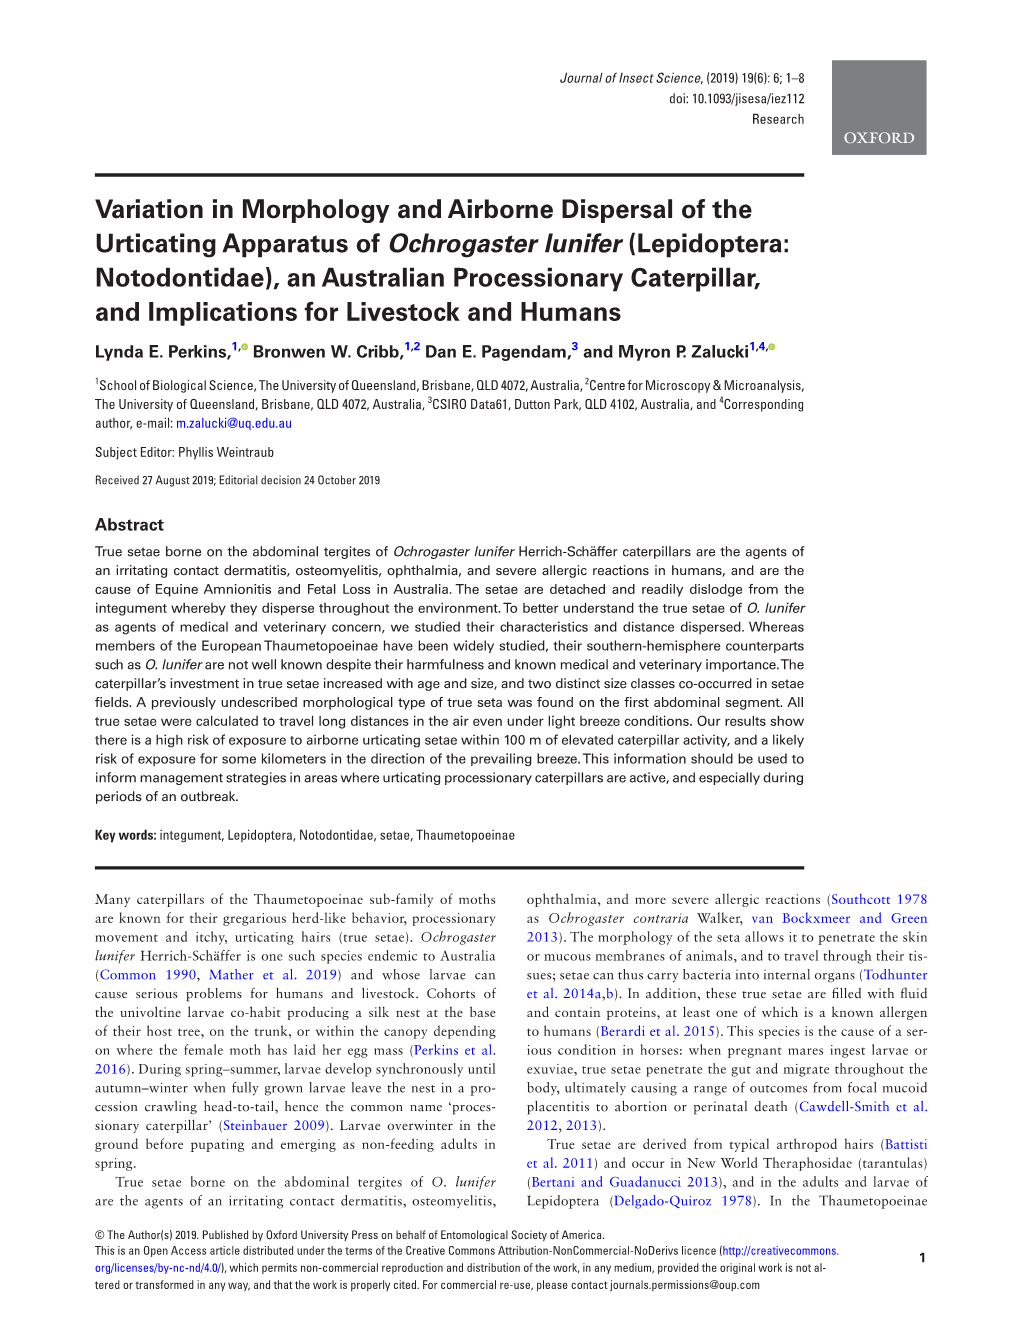 Variation in Morphology and Airborne Dispersal of the Urticating